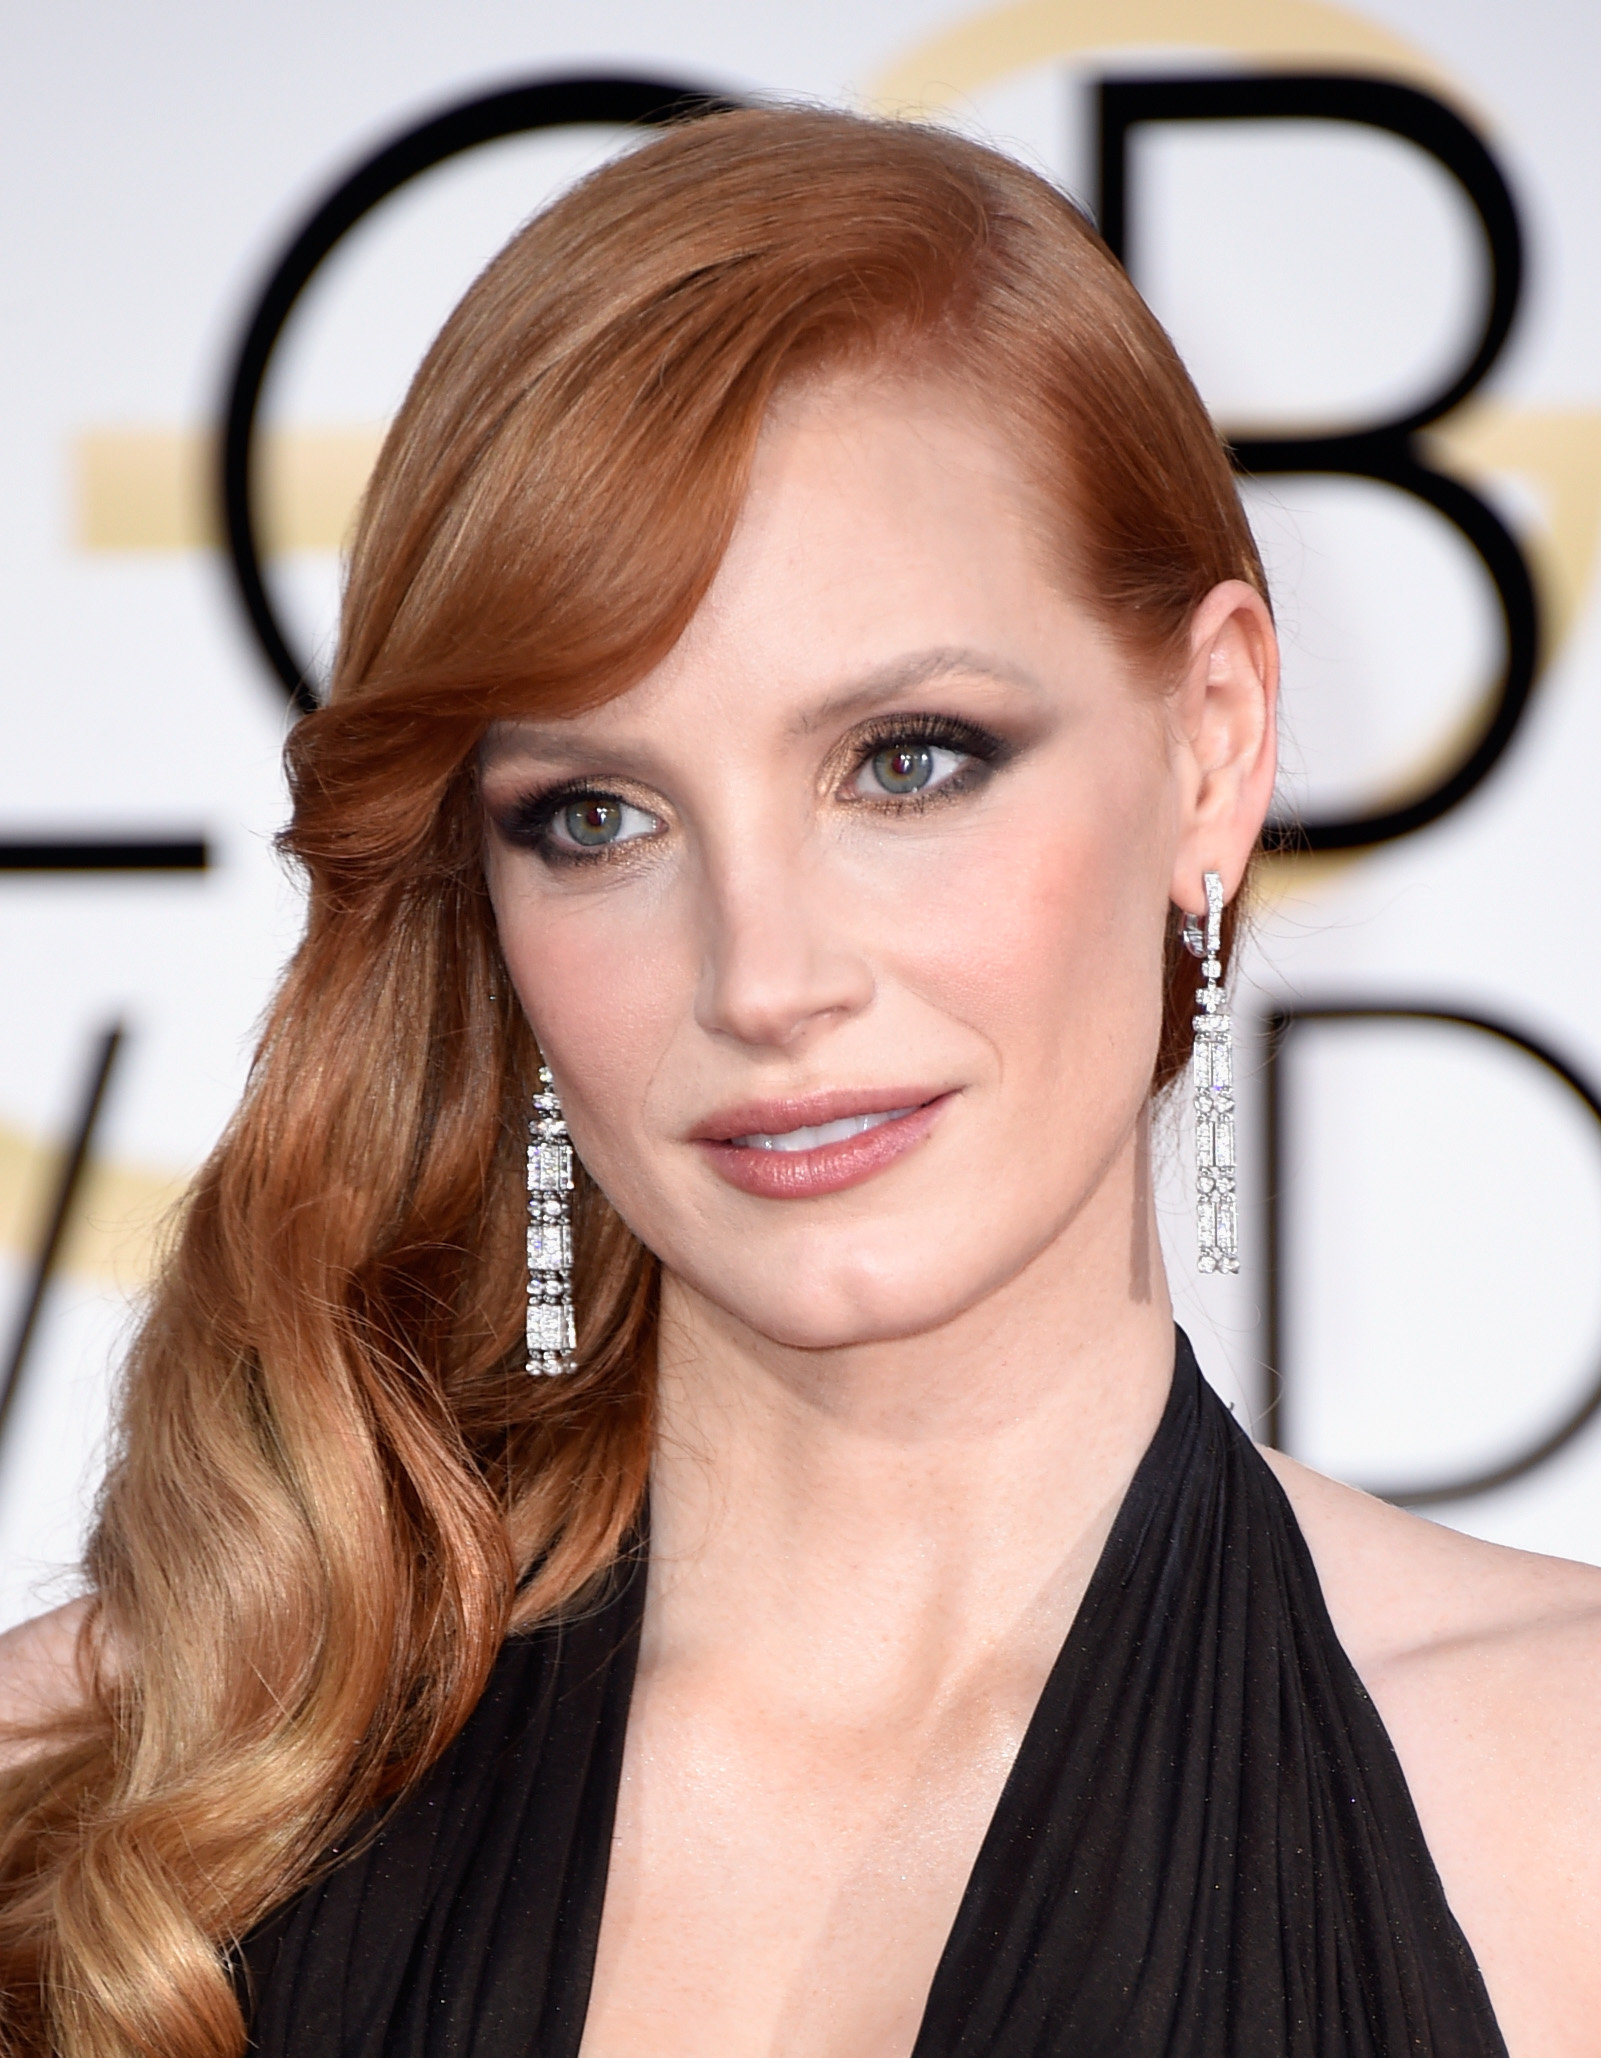 Jessica Chastain Breaks All The Redhead Beauty Rules And Looks Amazing Huffpost